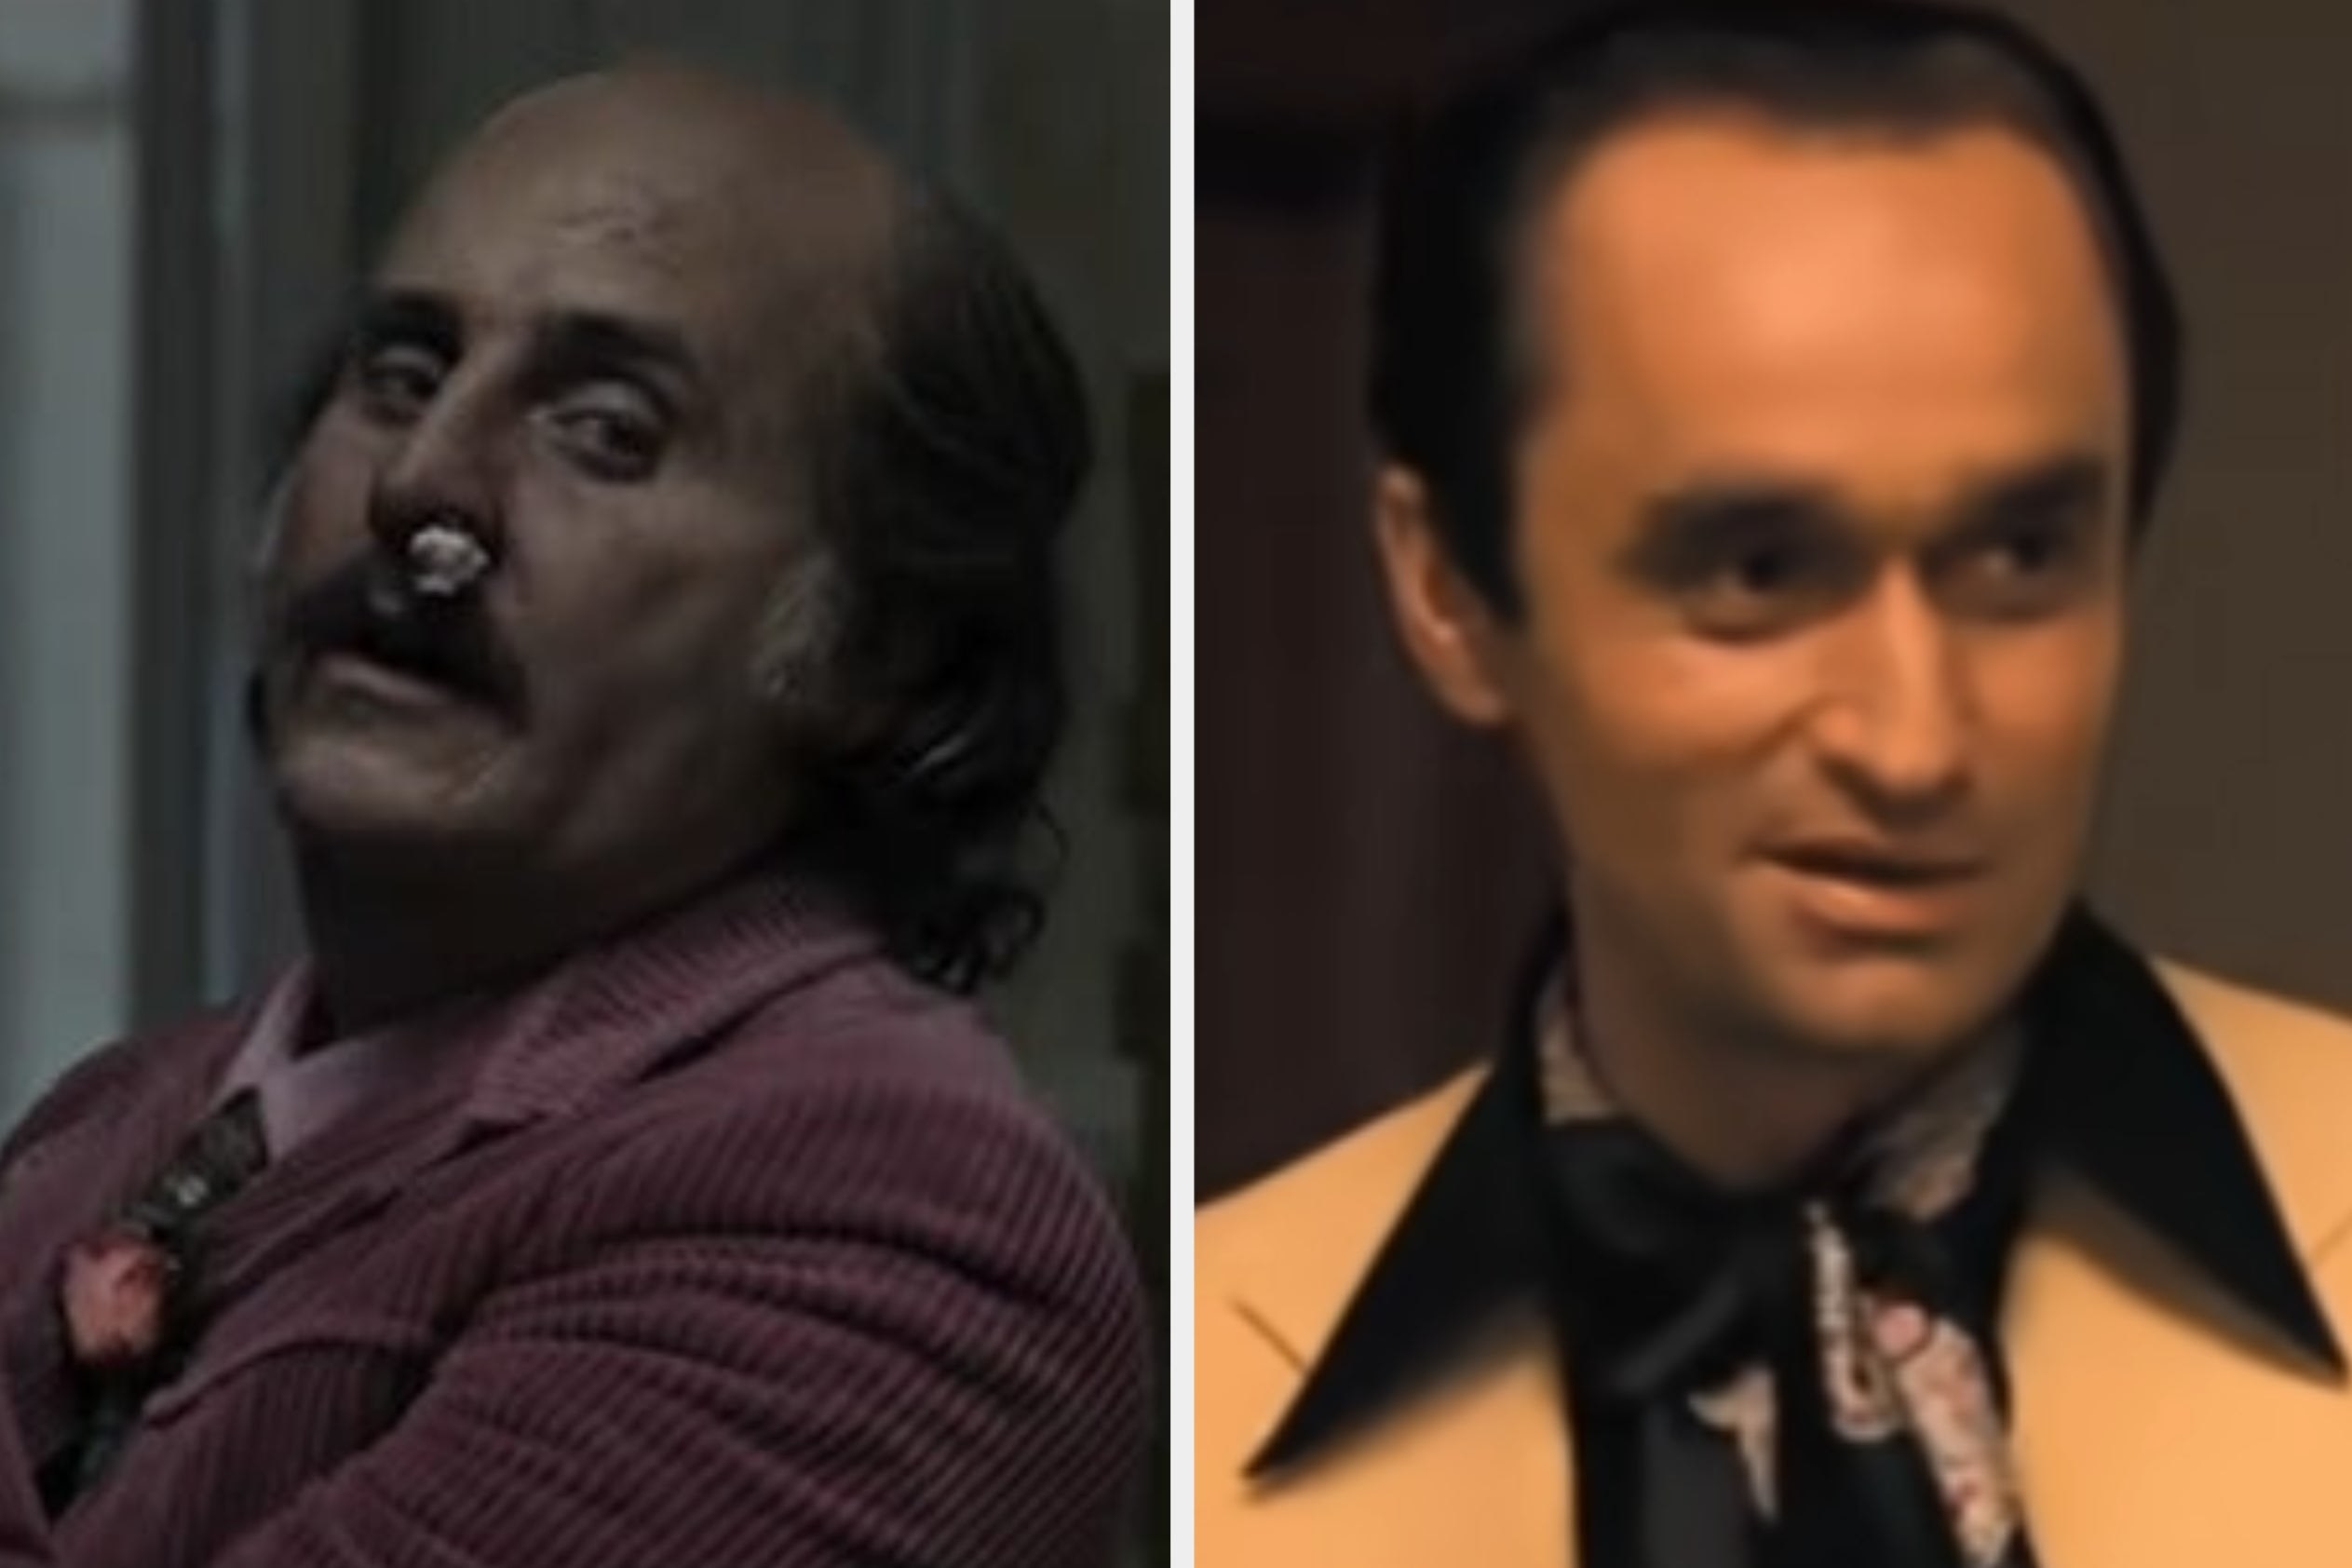 Paolo Gucci with a tissue in his nose holding a cigarette in &quot;House of Gucci&quot;/Fredo in &quot;The Godfather&quot;